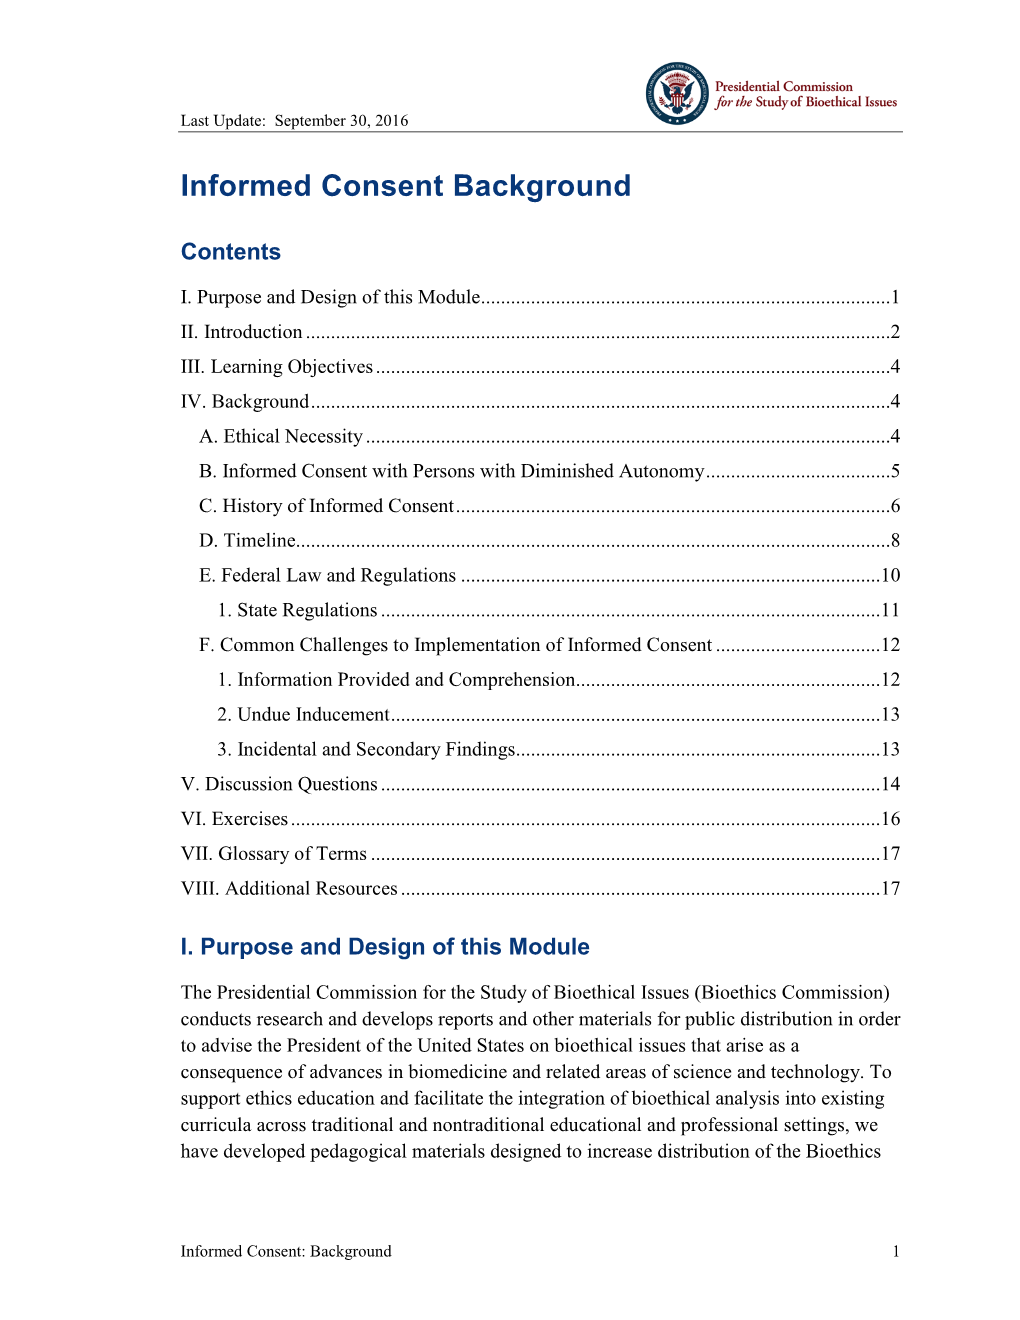 Informed Consent Background